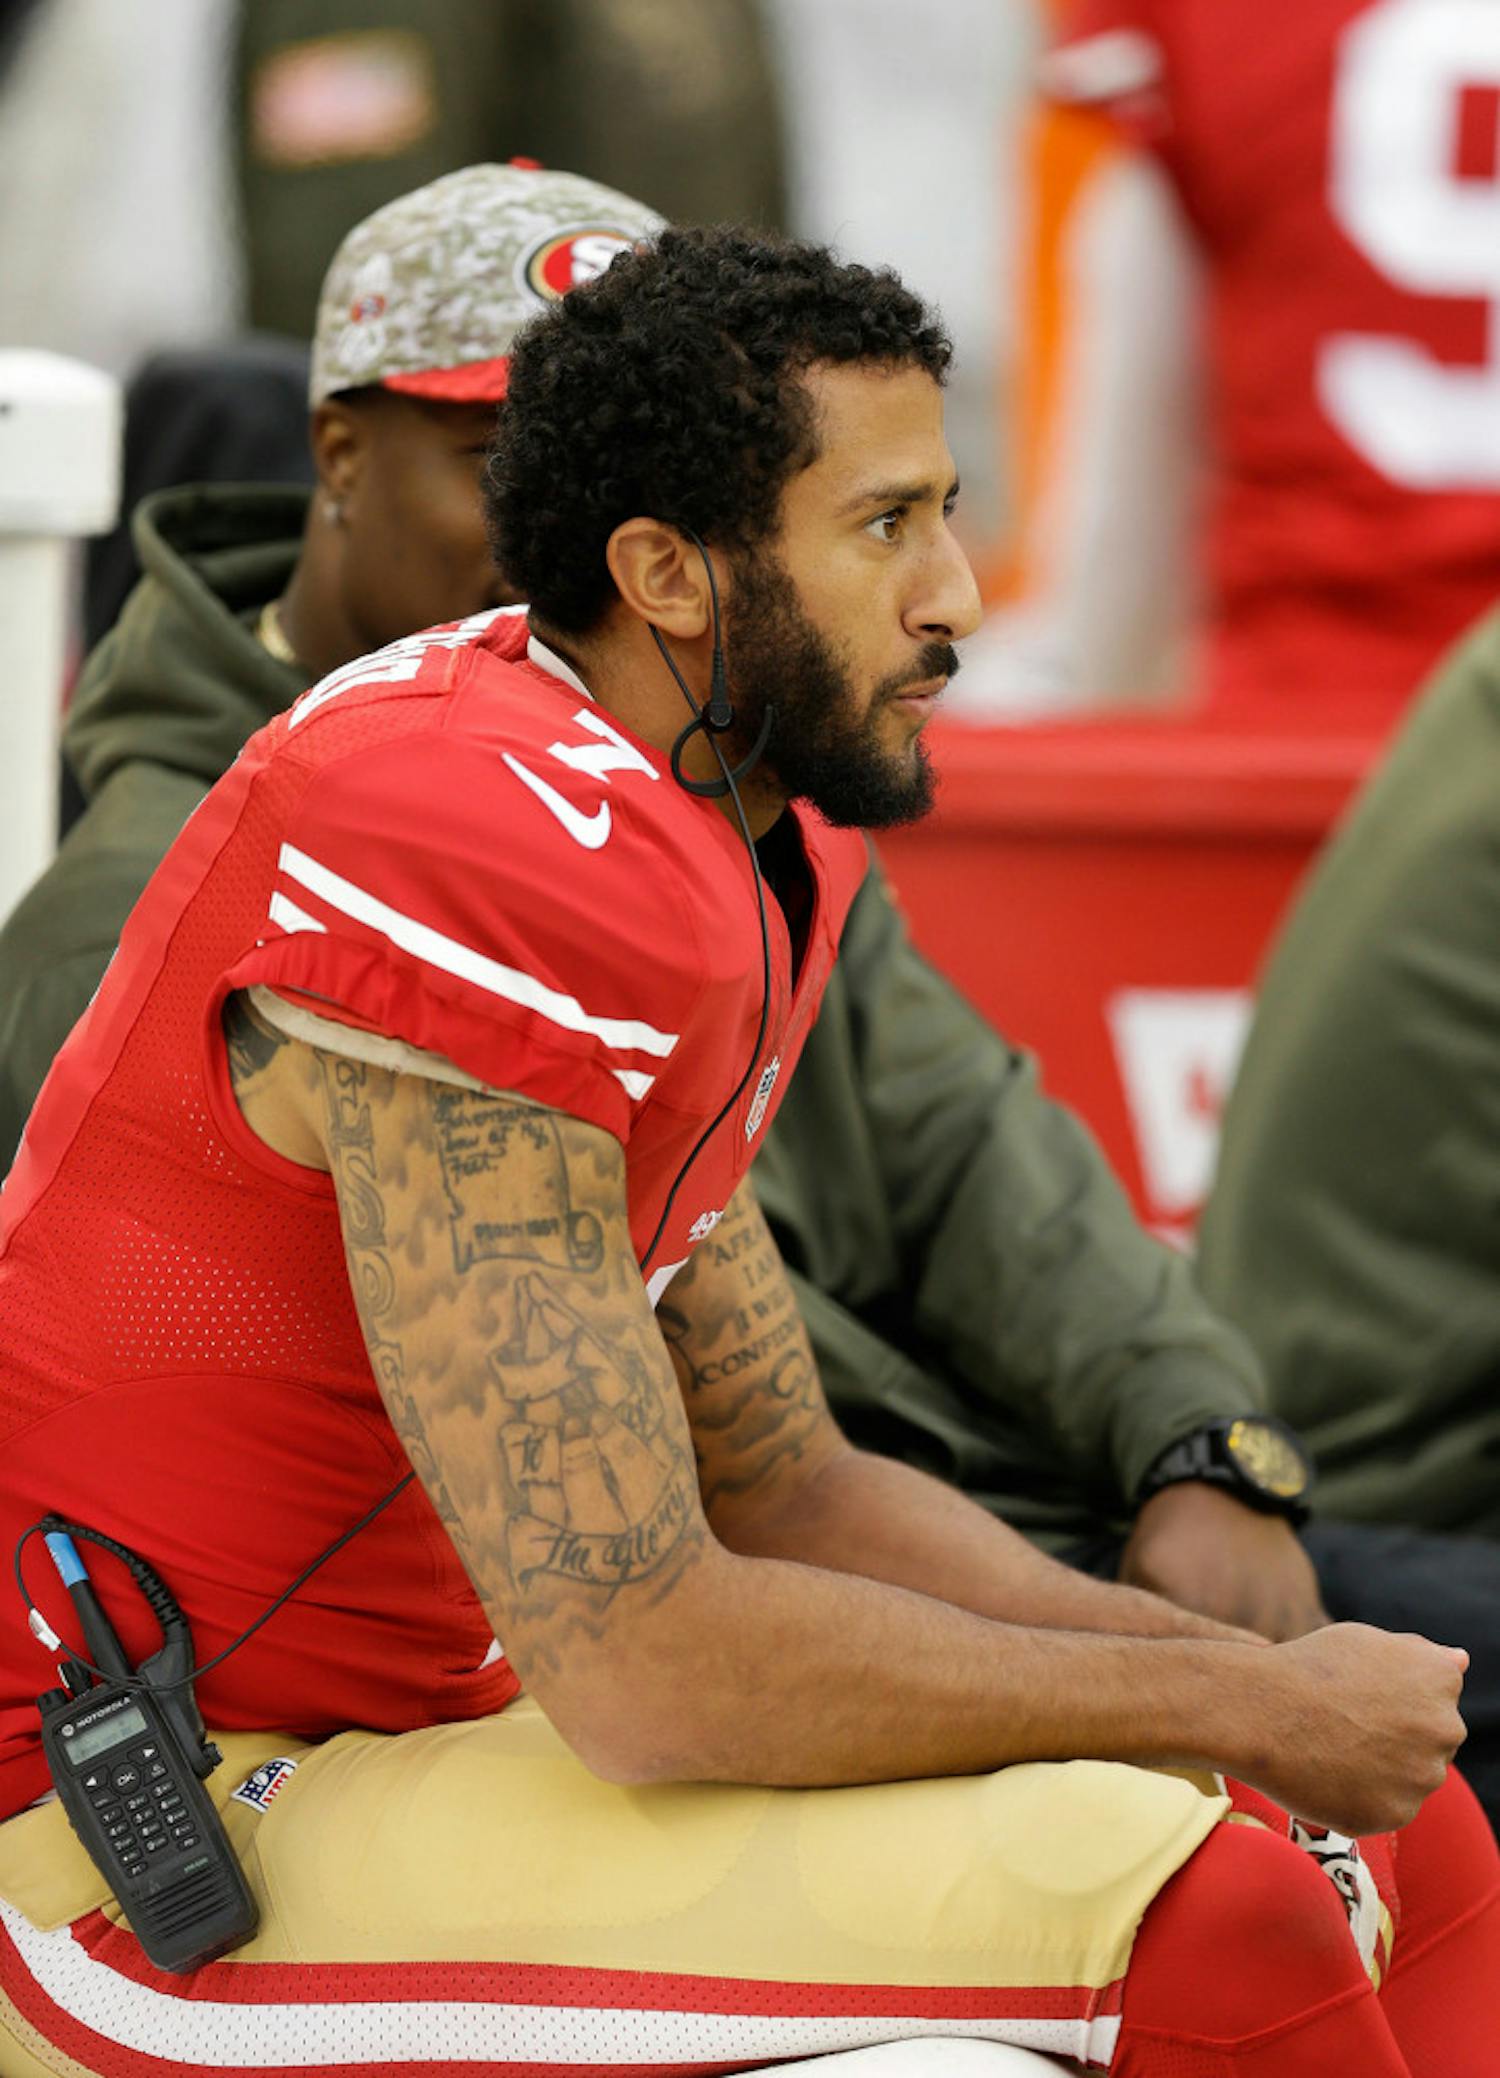 FILE--In this Nov. 8, 2015, file photo, San Francisco 49ers quarterback Colin Kaepernick sits on the sideline during the second half of an NFL football game against the Atlanta Falcons in Santa Clara, Calif. A northern Nevada airport is getting an earful about a decorative display that, in part, highlights Kaepernick, a treasured product of the University of Nevada's football program who in recent days has been in the spotlight over his decision to sit down during the national anthem. (AP Photo/Ben Margot, File)